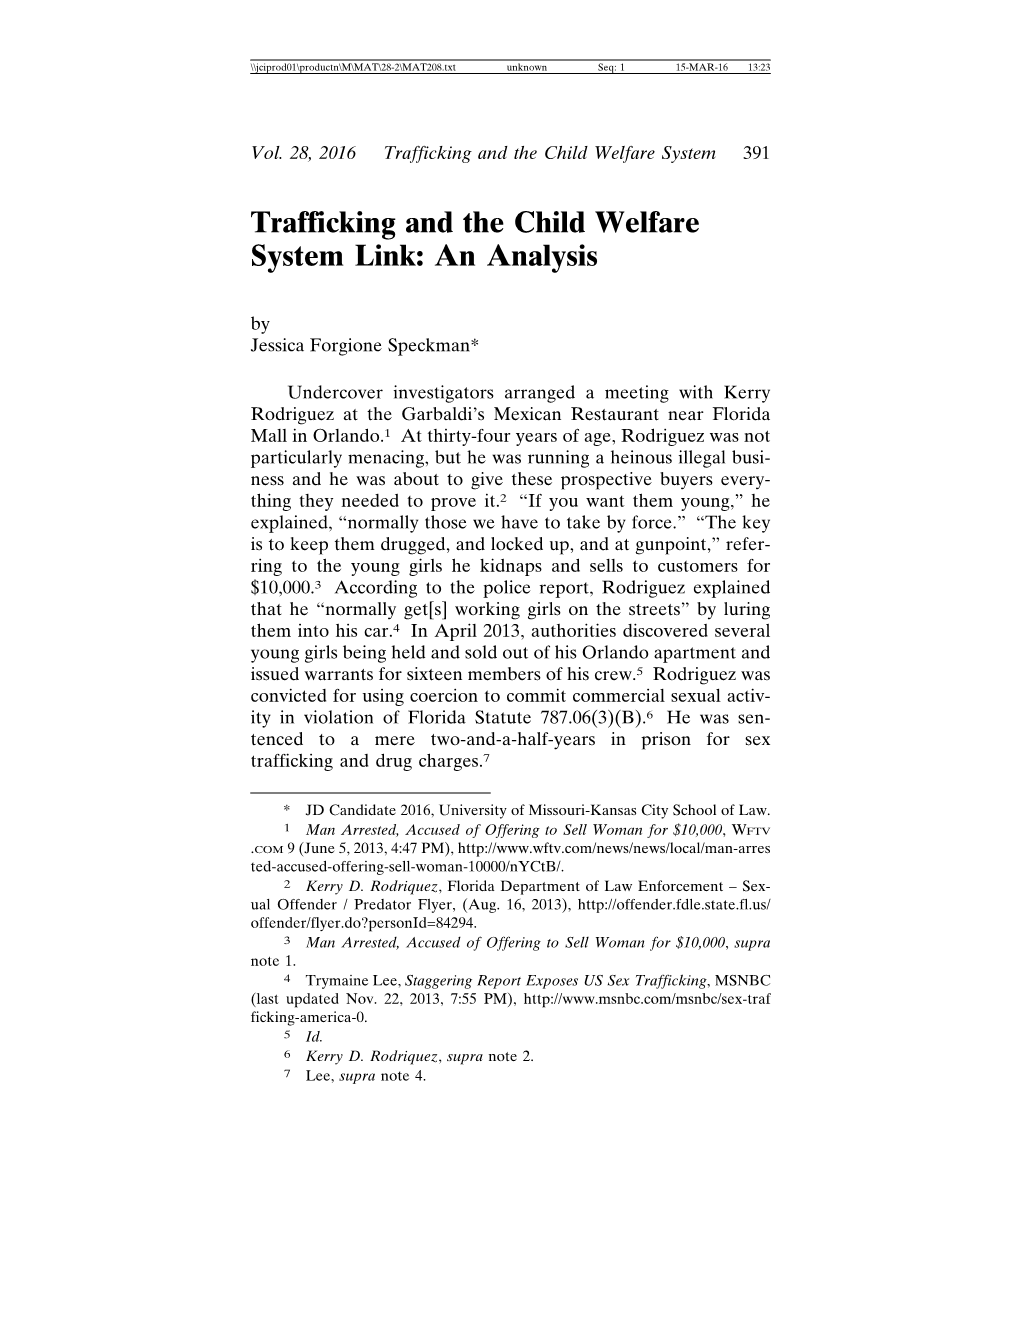 Trafficking and the Child Welfare System Link: an Analysis by Jessica Forgione Speckman*